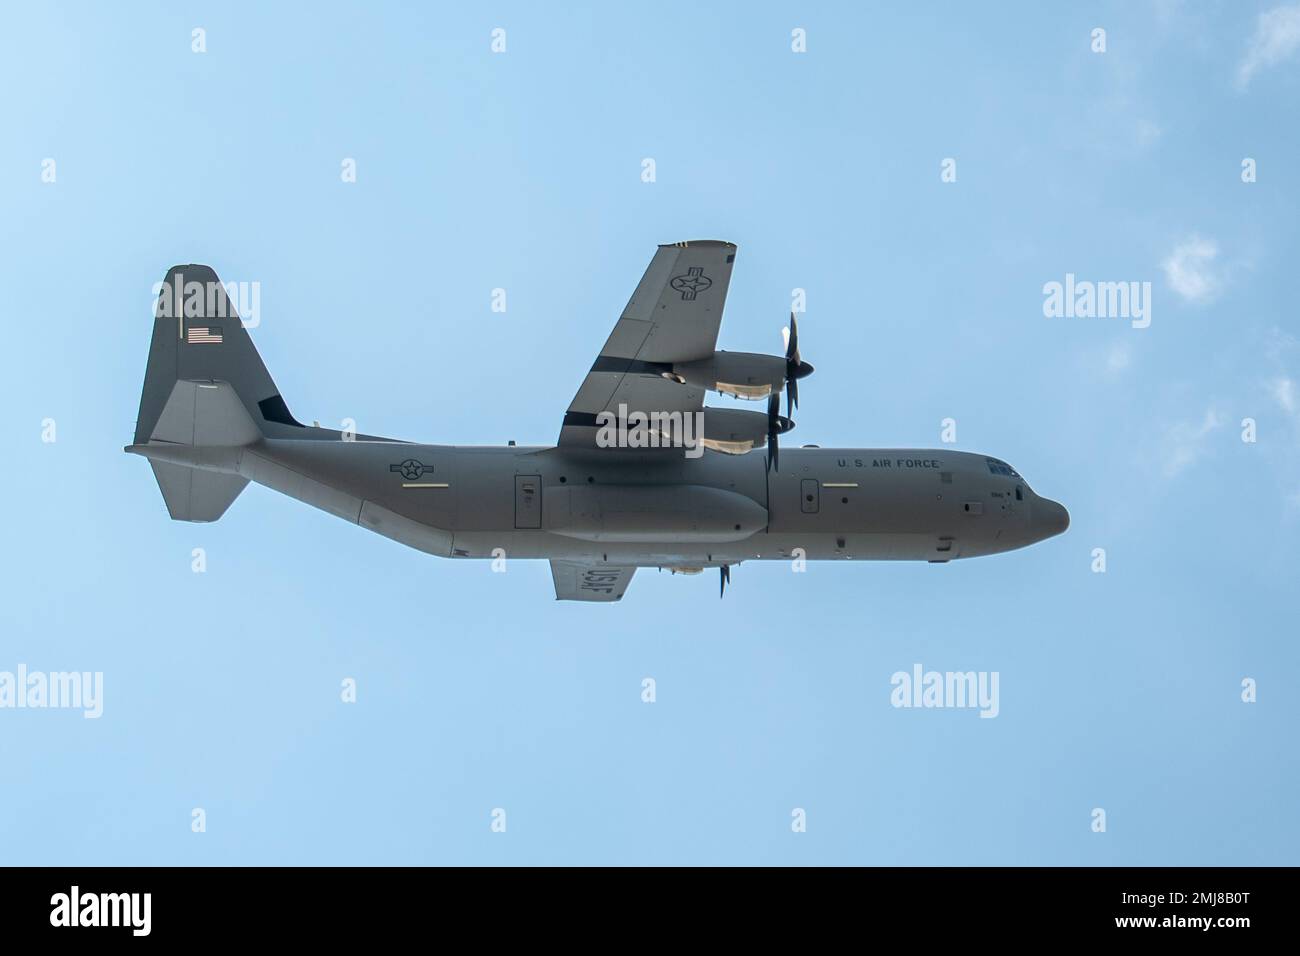 A C-130J Super Hercules aircraft arrives at the Kentucky Air National Guard Base in Louisville, Ky., from Lockheed-Martin Corp. In Marietta, Ga., Aug. 25, 2022. The plane is the eighth J-model to be delivered to the 123rd Airlift Wing since November, completing the unit’s transition from legacy-model C-130H transports. Stock Photo